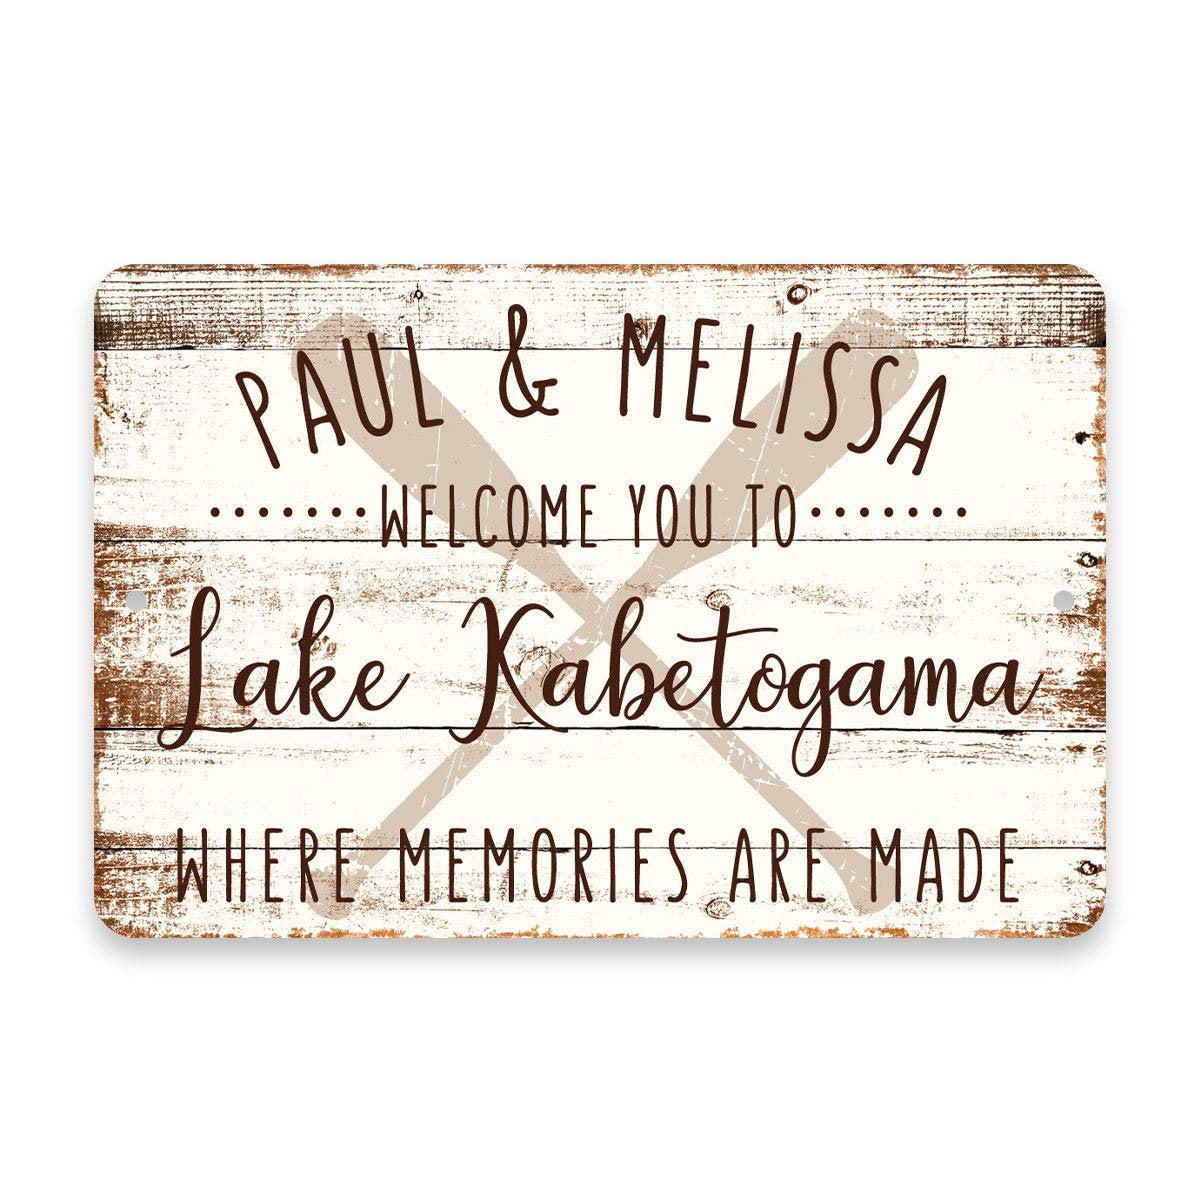 Personalized Welcome to Lake Kabetogama Where Memories are Made Sign - 8 X 12 Metal Sign with Wood Look